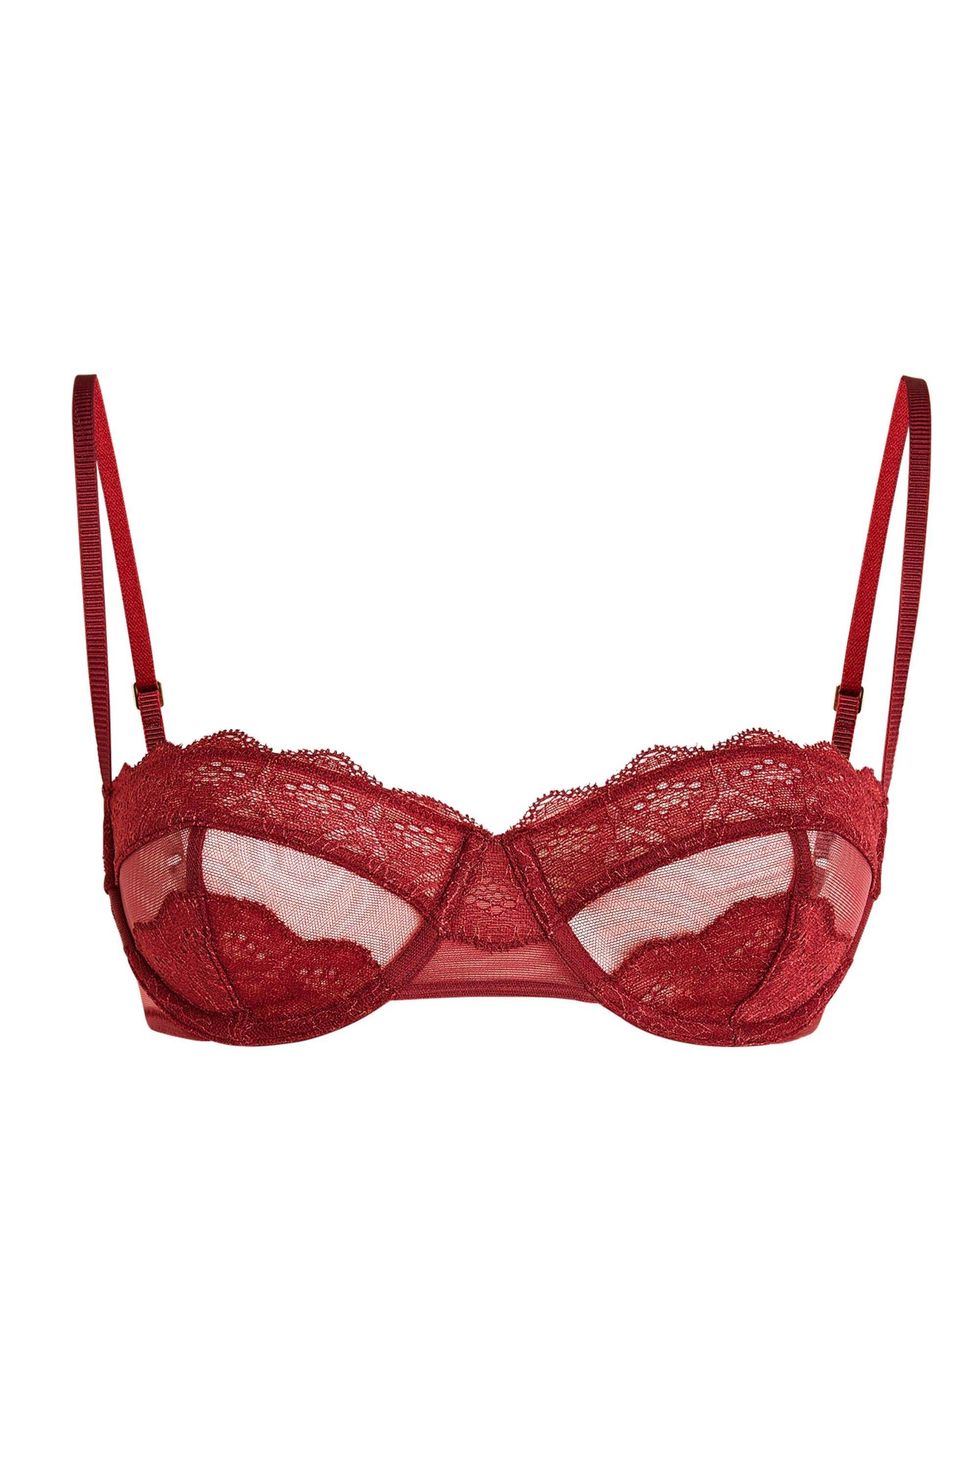 Underwear Woman Isolated. Close-up of a Luxurious Elegant Red Lacy